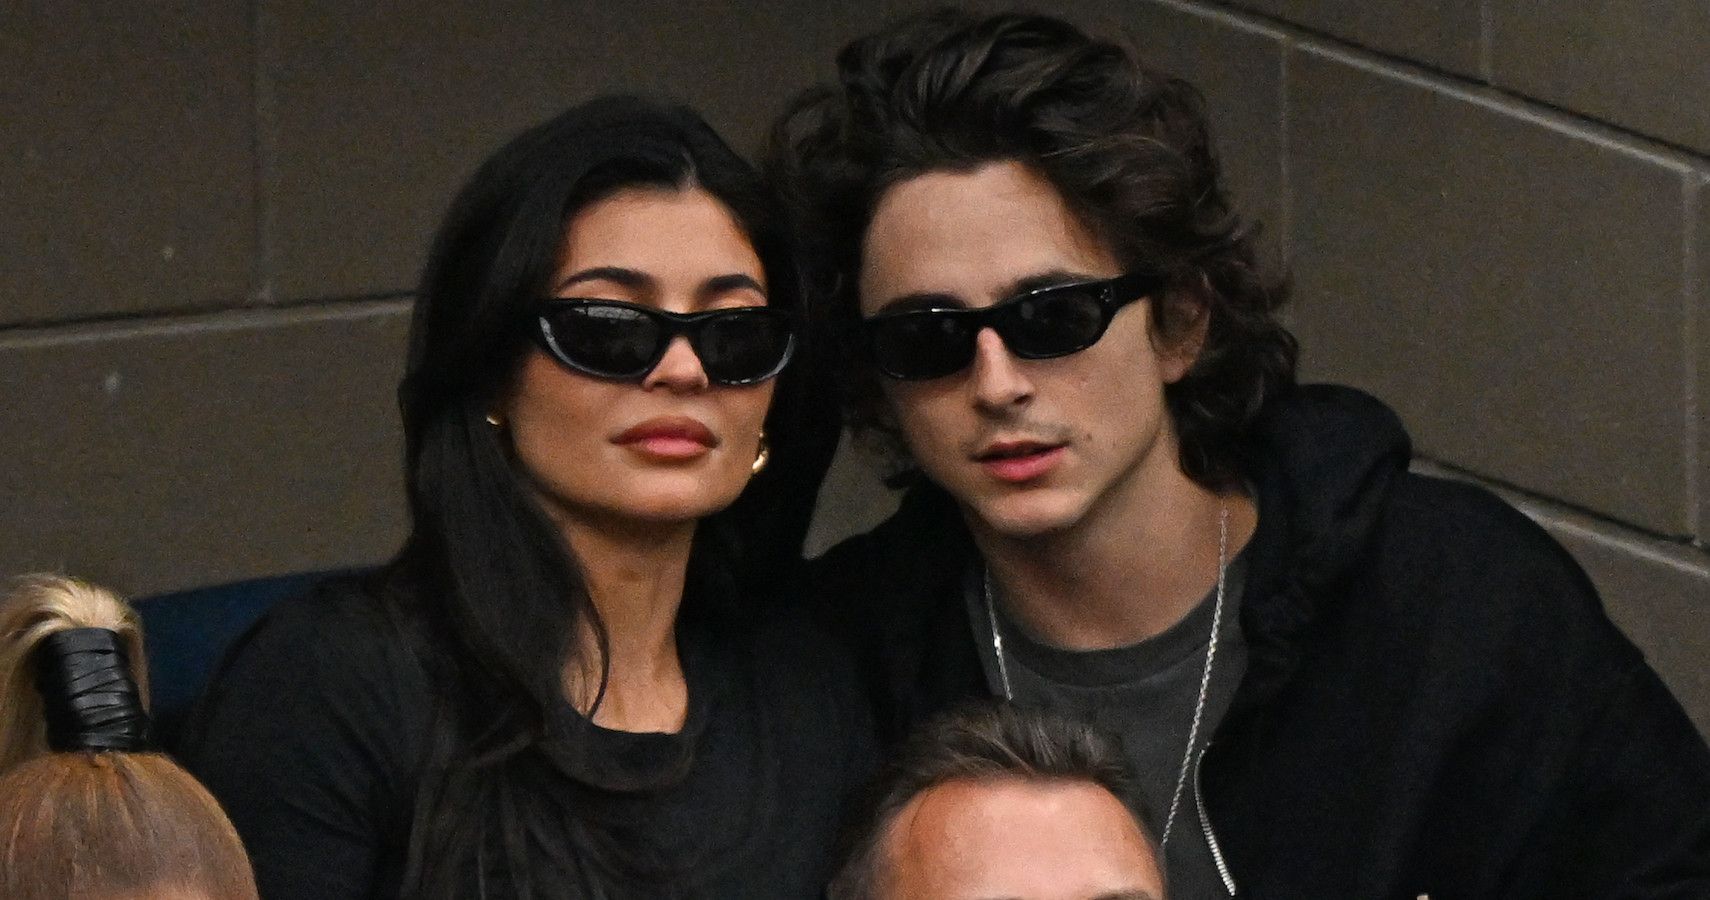 Kylie Jenner Spotted Wearing a Ring While Out with Timothée Chalamet